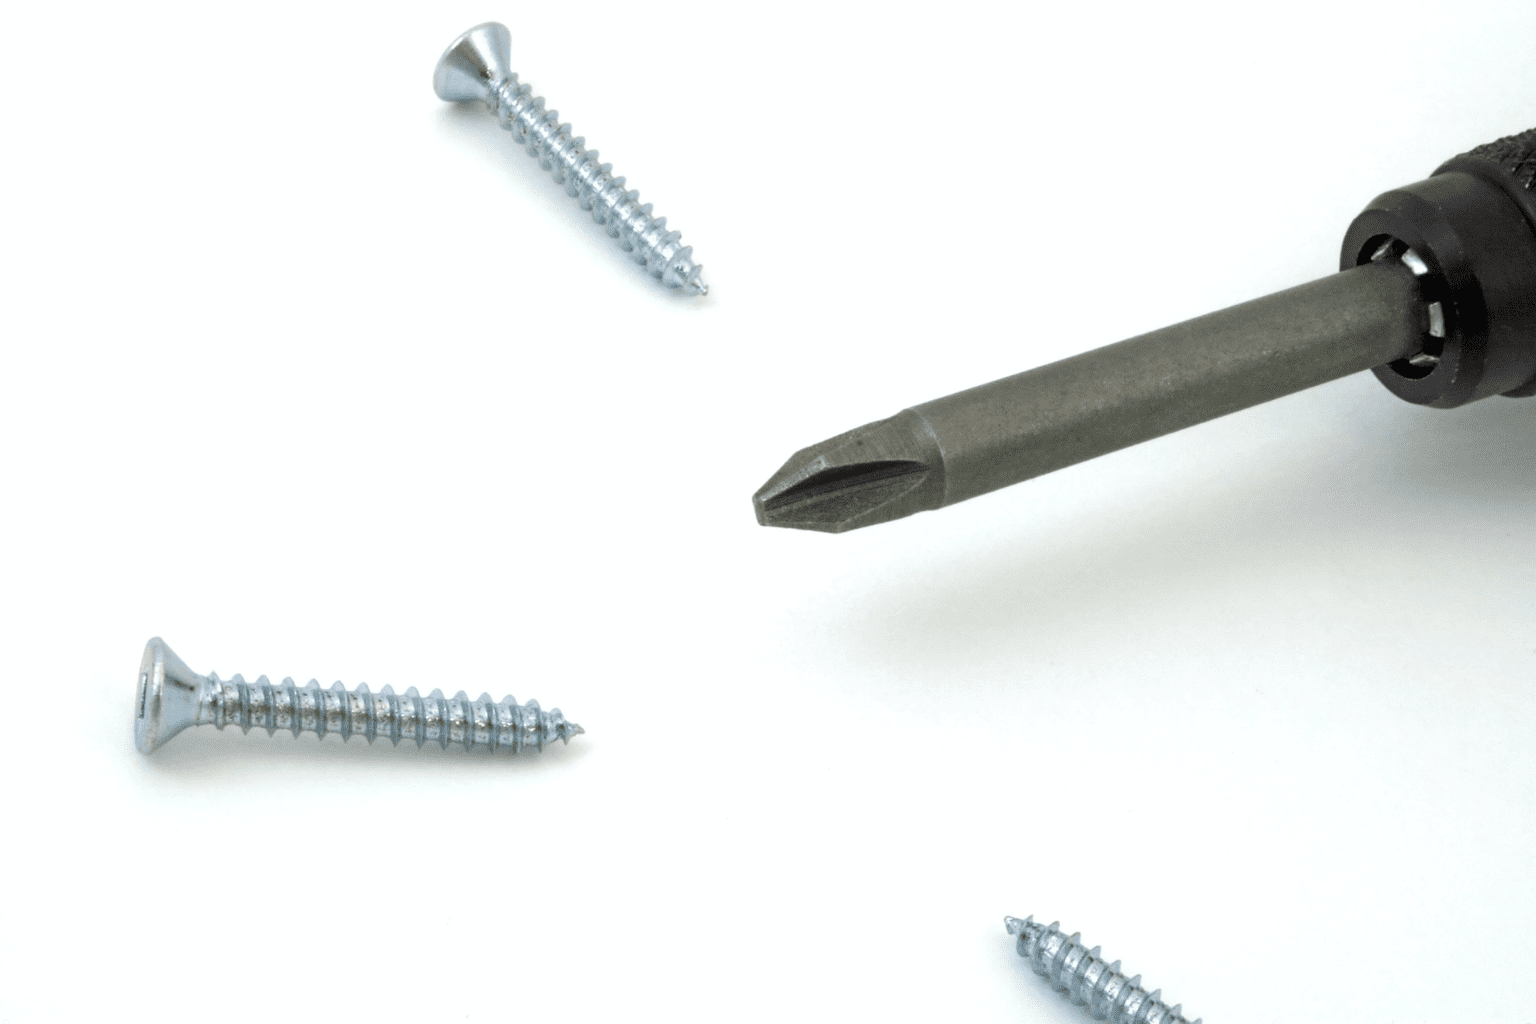 With so many different nails, screws, and stud options it can be hard to choose an adequate one for your project